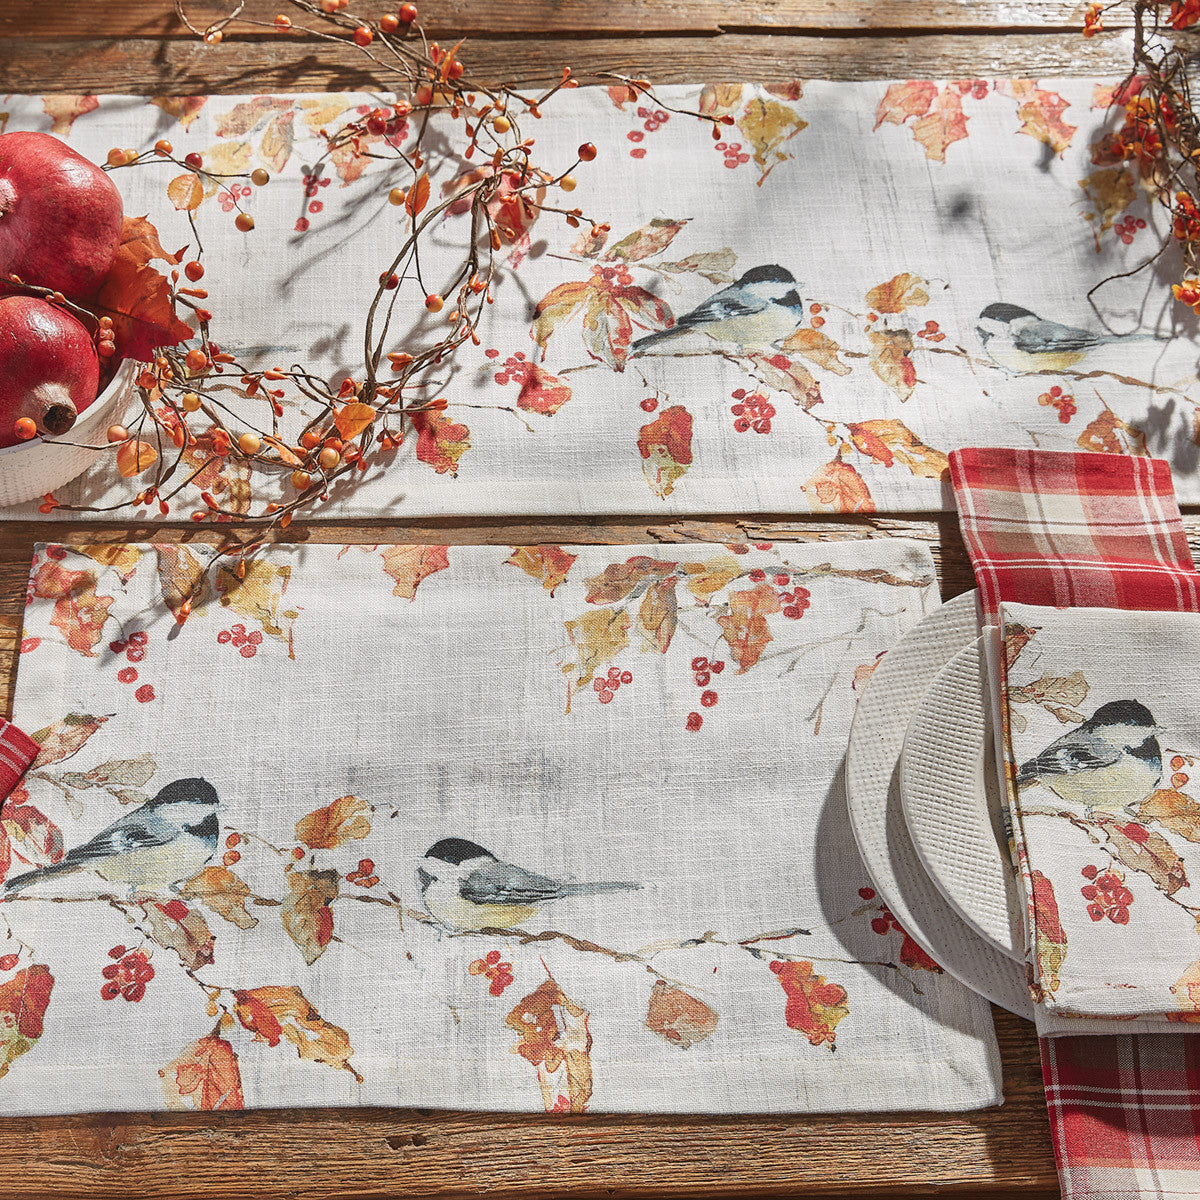 Fall Blessings Placemats - Set of 6 Park Designs